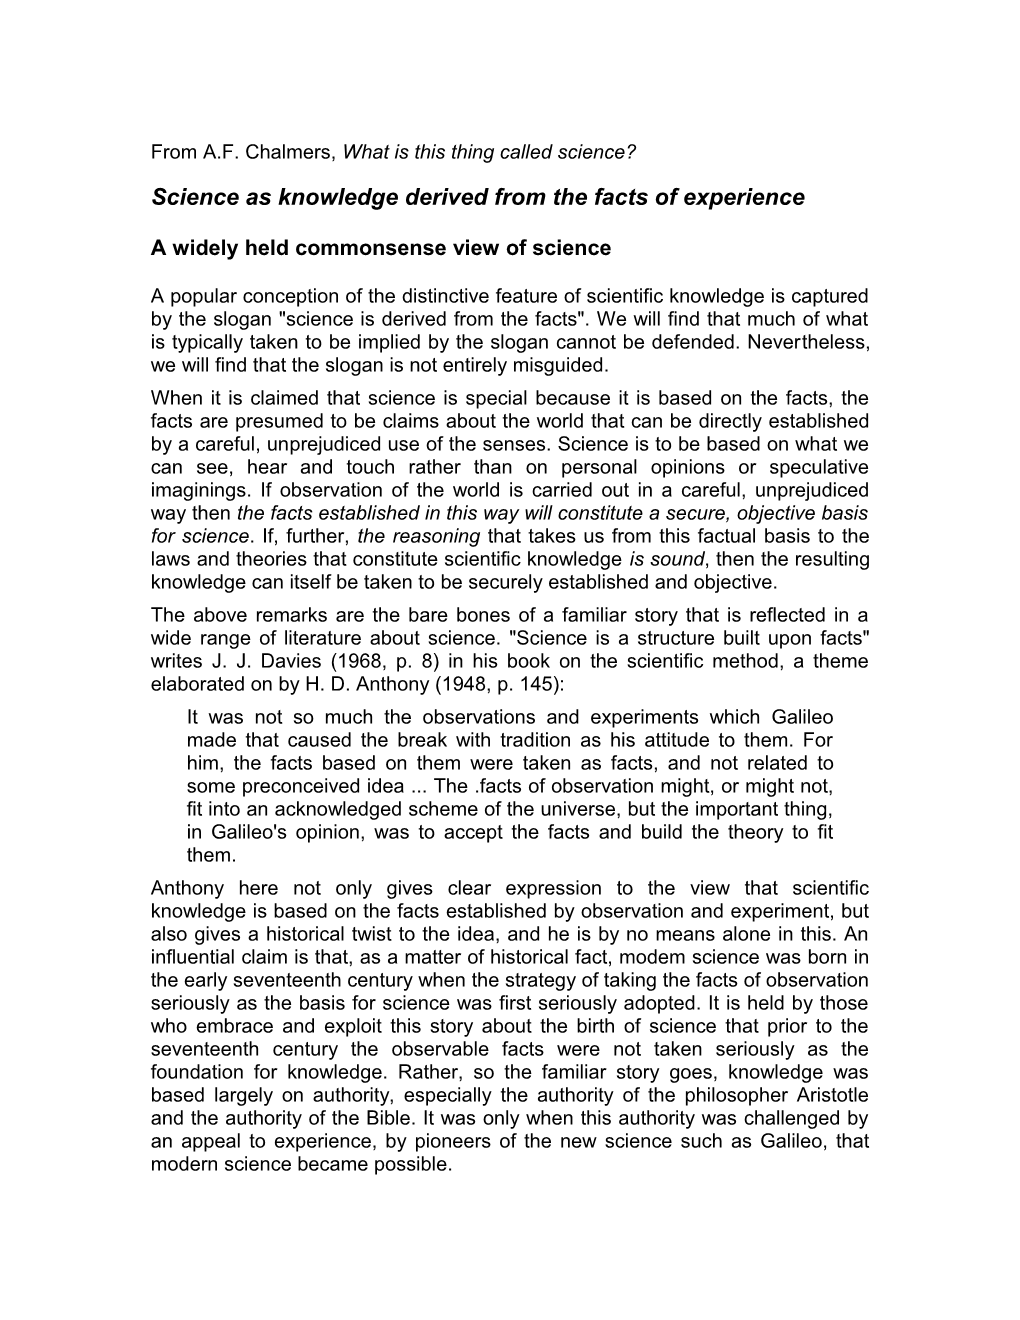 Science As Knowledge Derived from the Facts of Experience